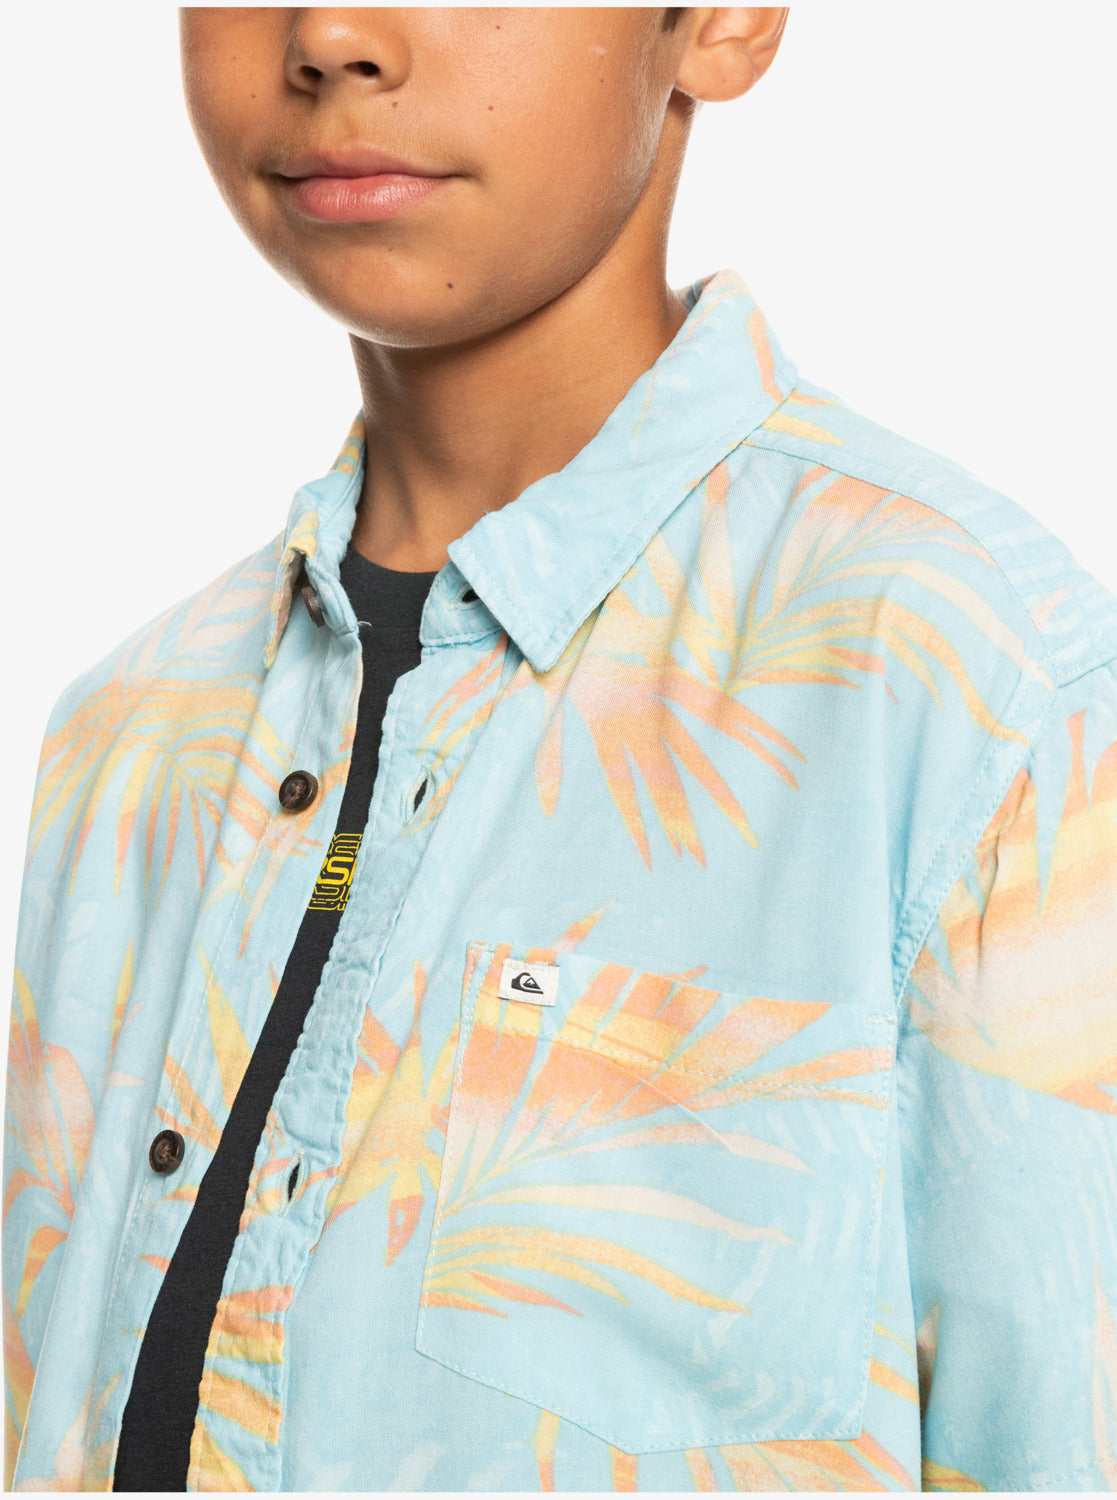 Quiksilver Ripped UP Woven SS.